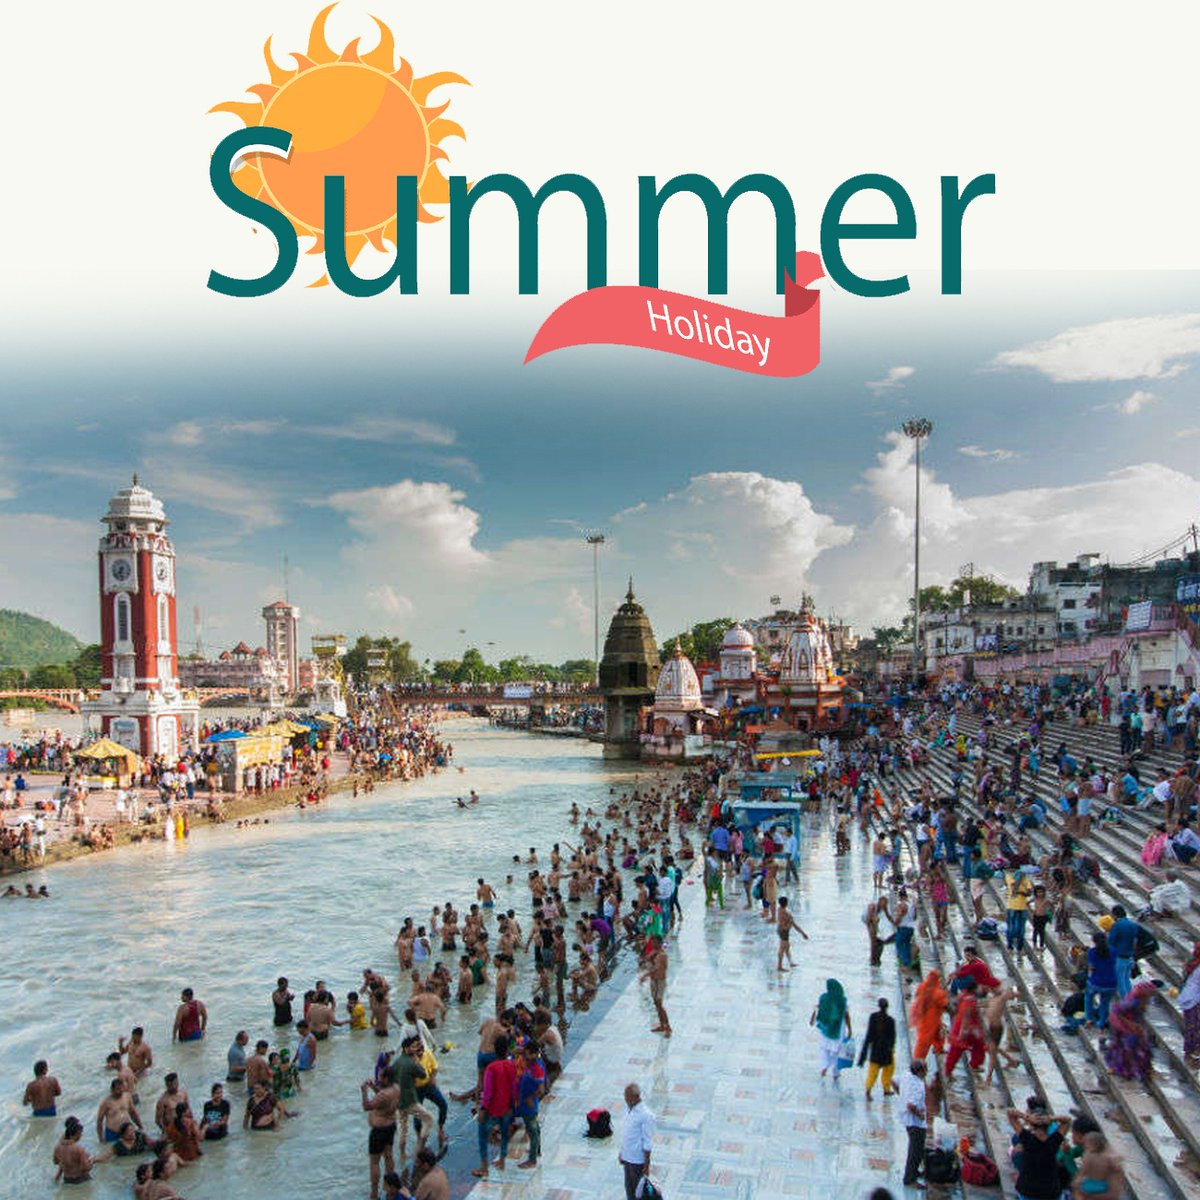 Even before the start of the summer holidays, tourists have started arriving in Haridwar and surrounding tourist areas. Make your holiday plan with a stay at Gobind Bhawan Haridwar.
#summervibes #summer #holidays #summervacation #haridwartrip #planyourtour #gobindbhawan #stay